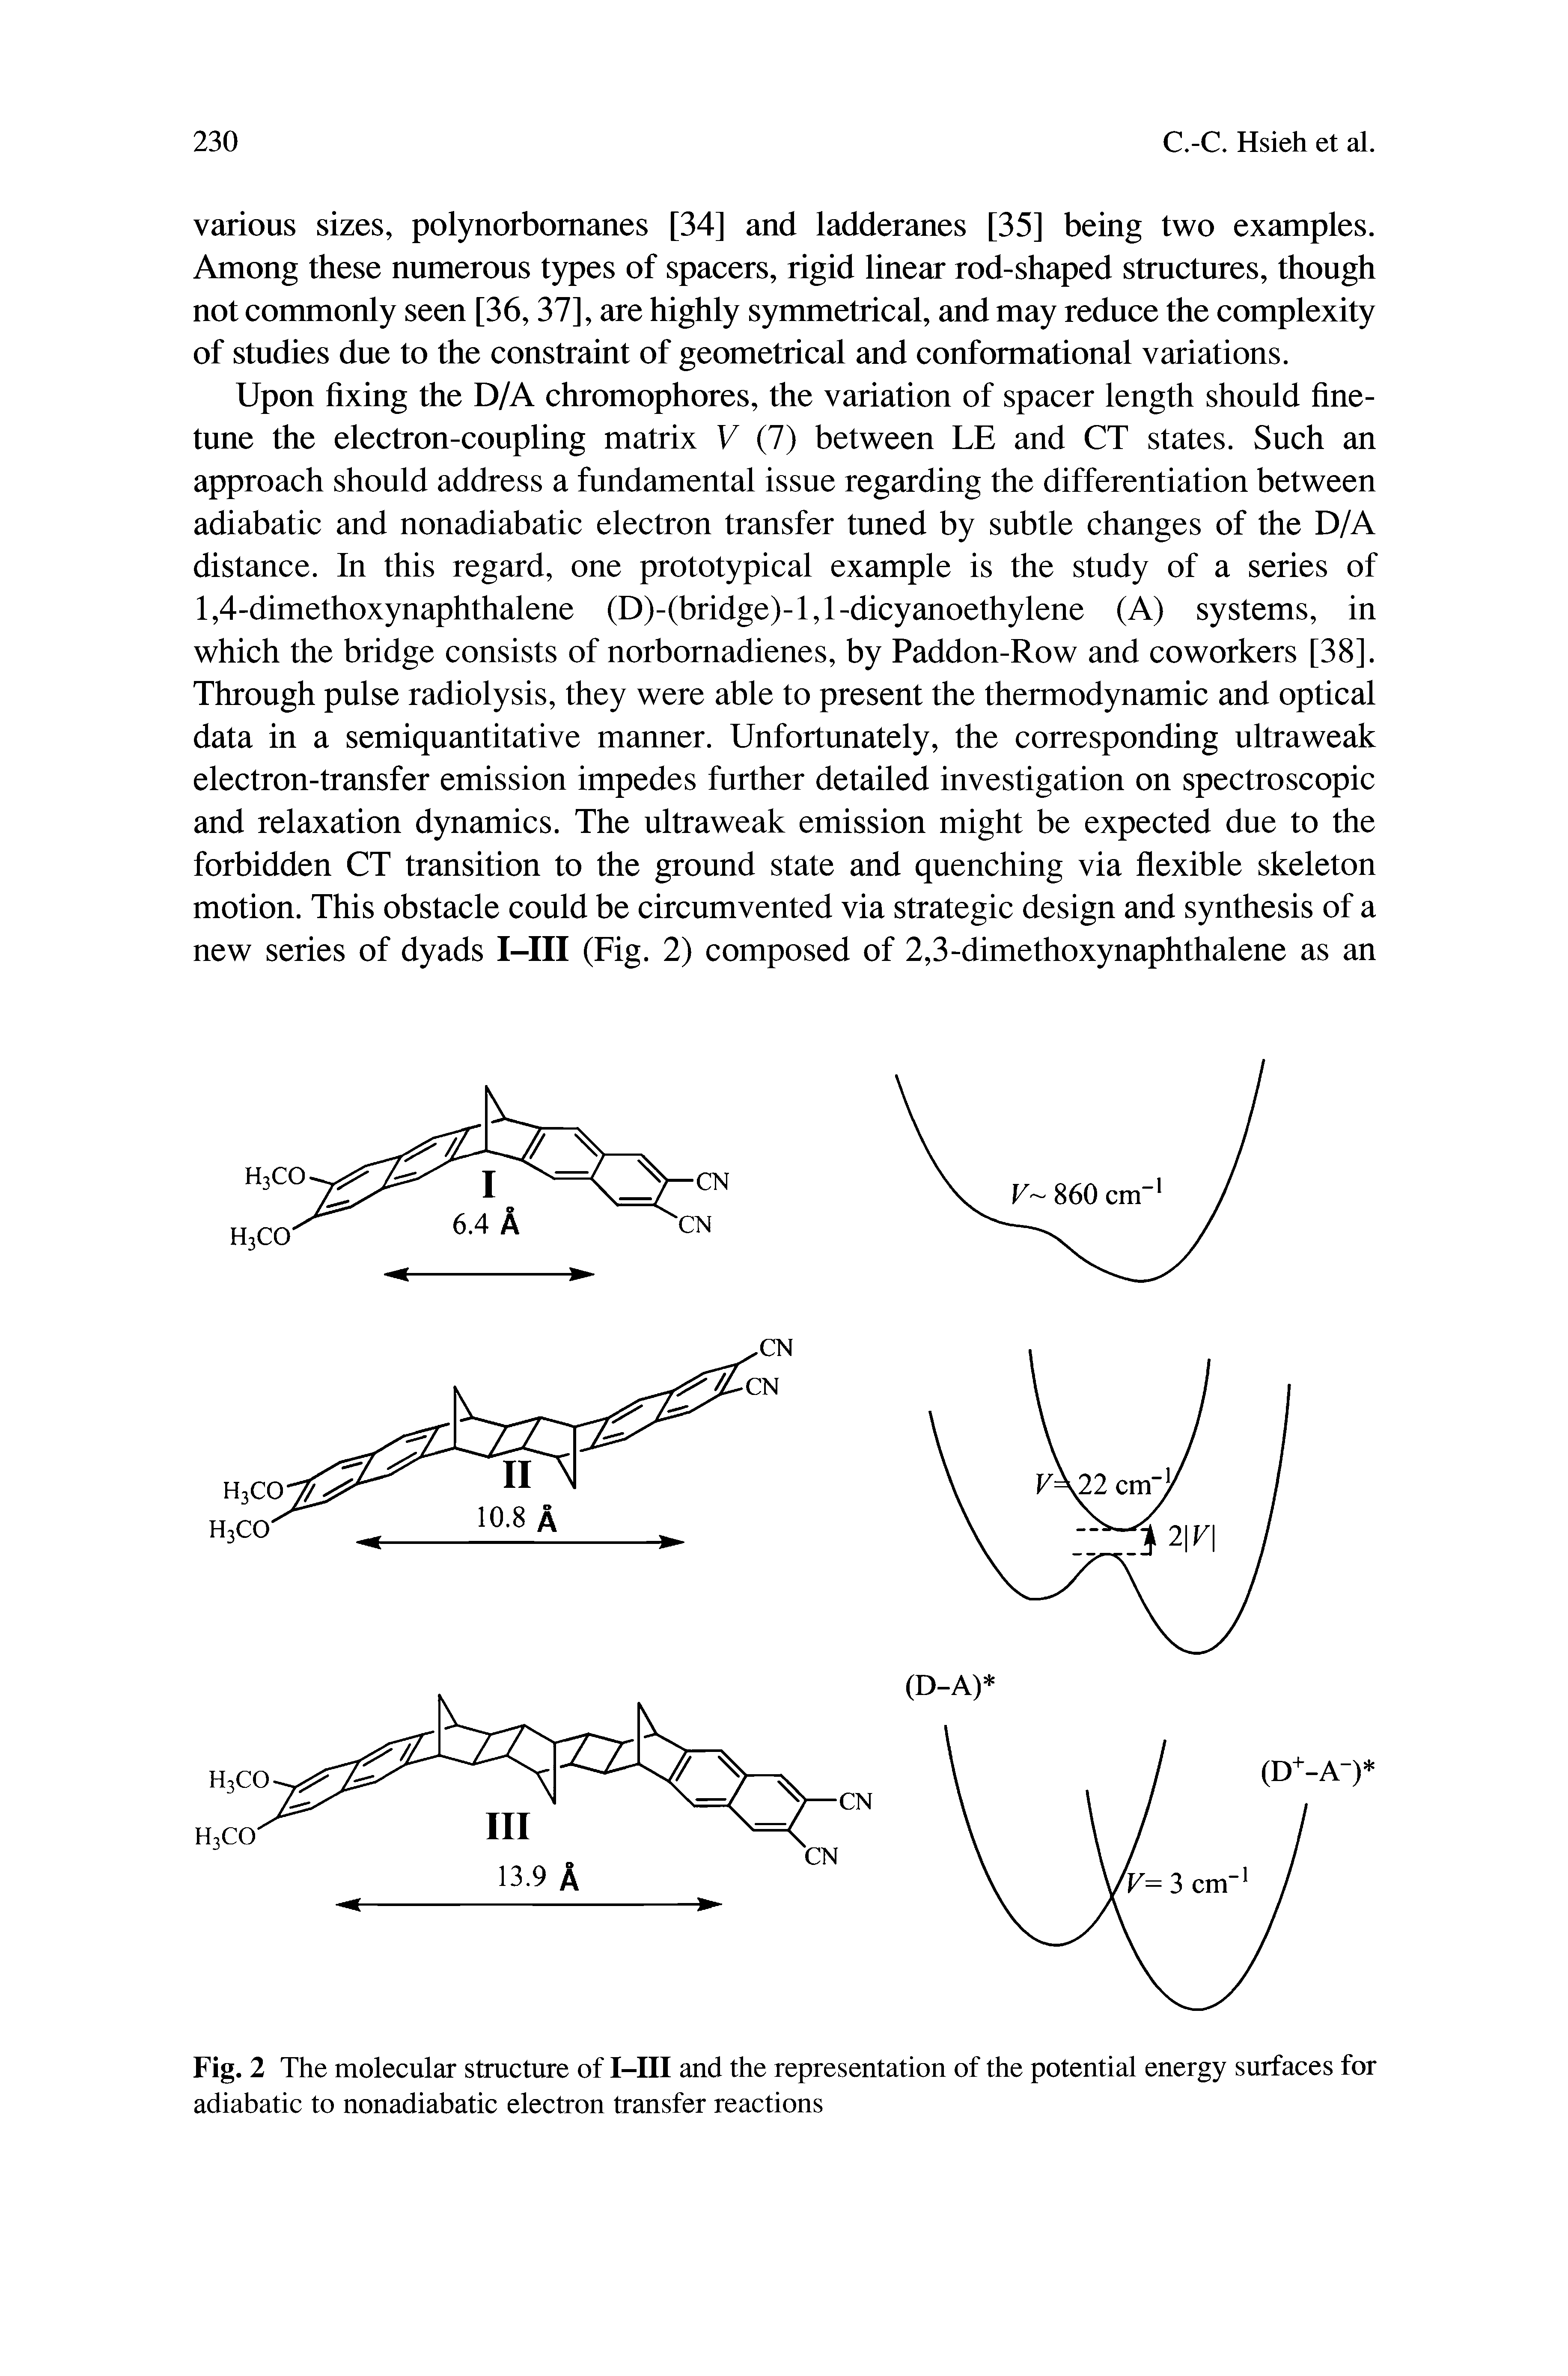 Fig. 2 The molecular structure of I—III and the representation of the potential energy surfaces for adiabatic to nonadiabatic electron transfer reactions...